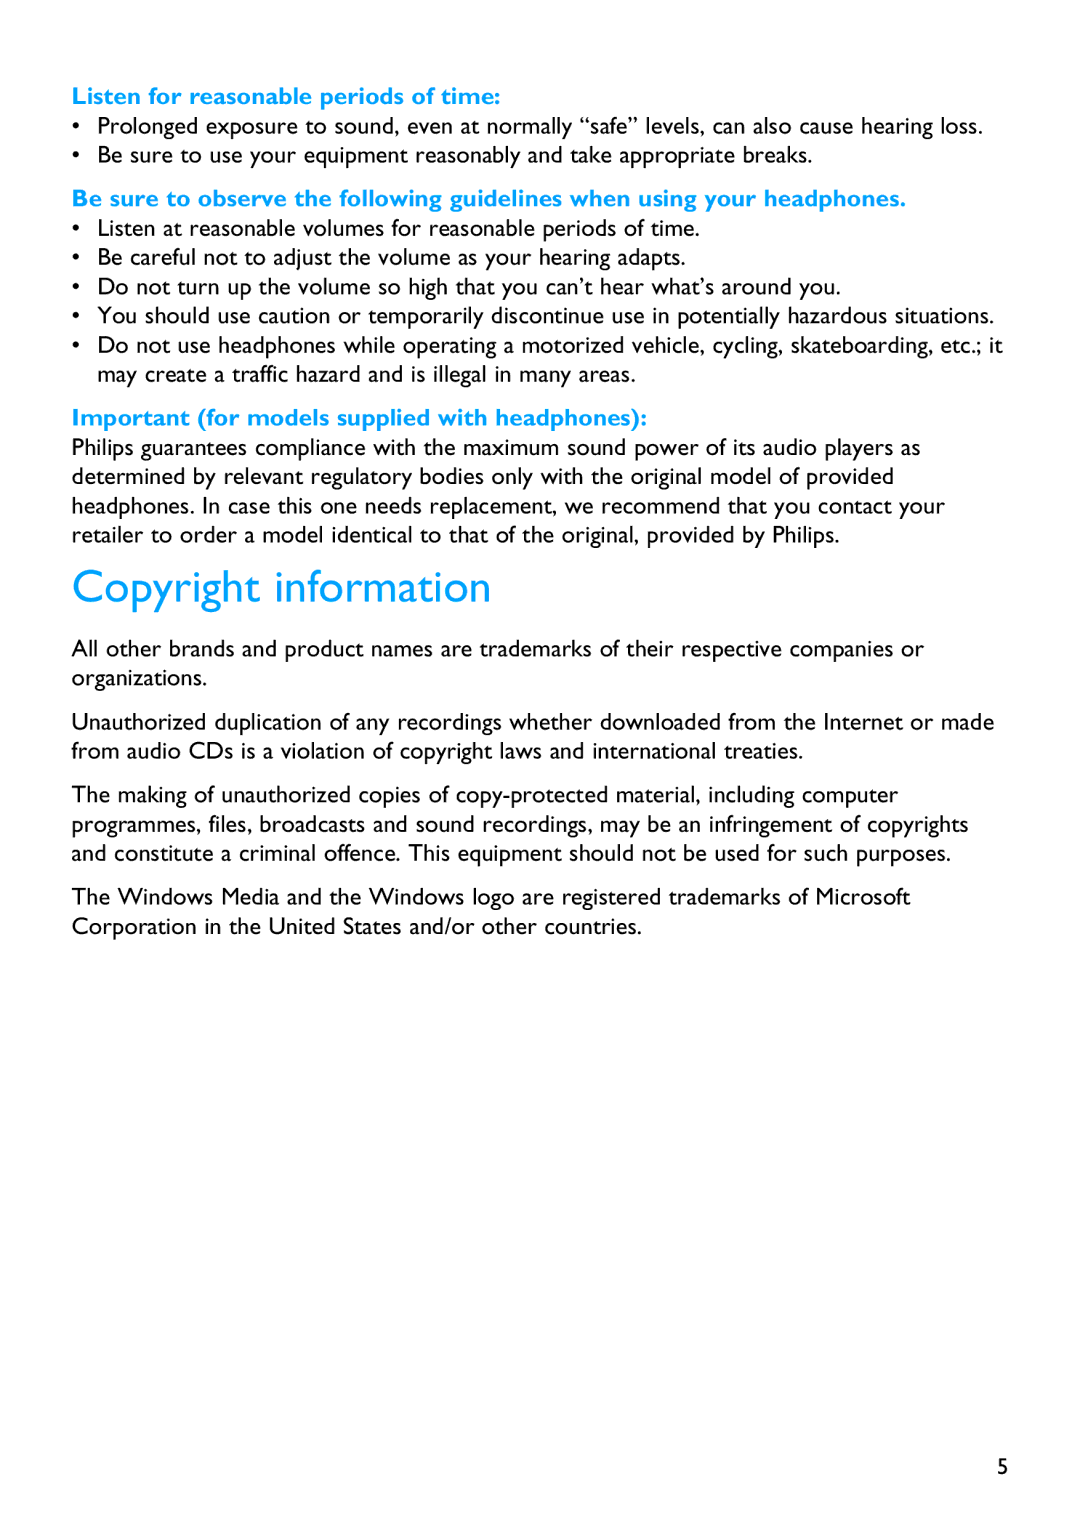 Philips SA2315 Copyright information, Listen for reasonable periods of time, Important for models supplied with headphones 